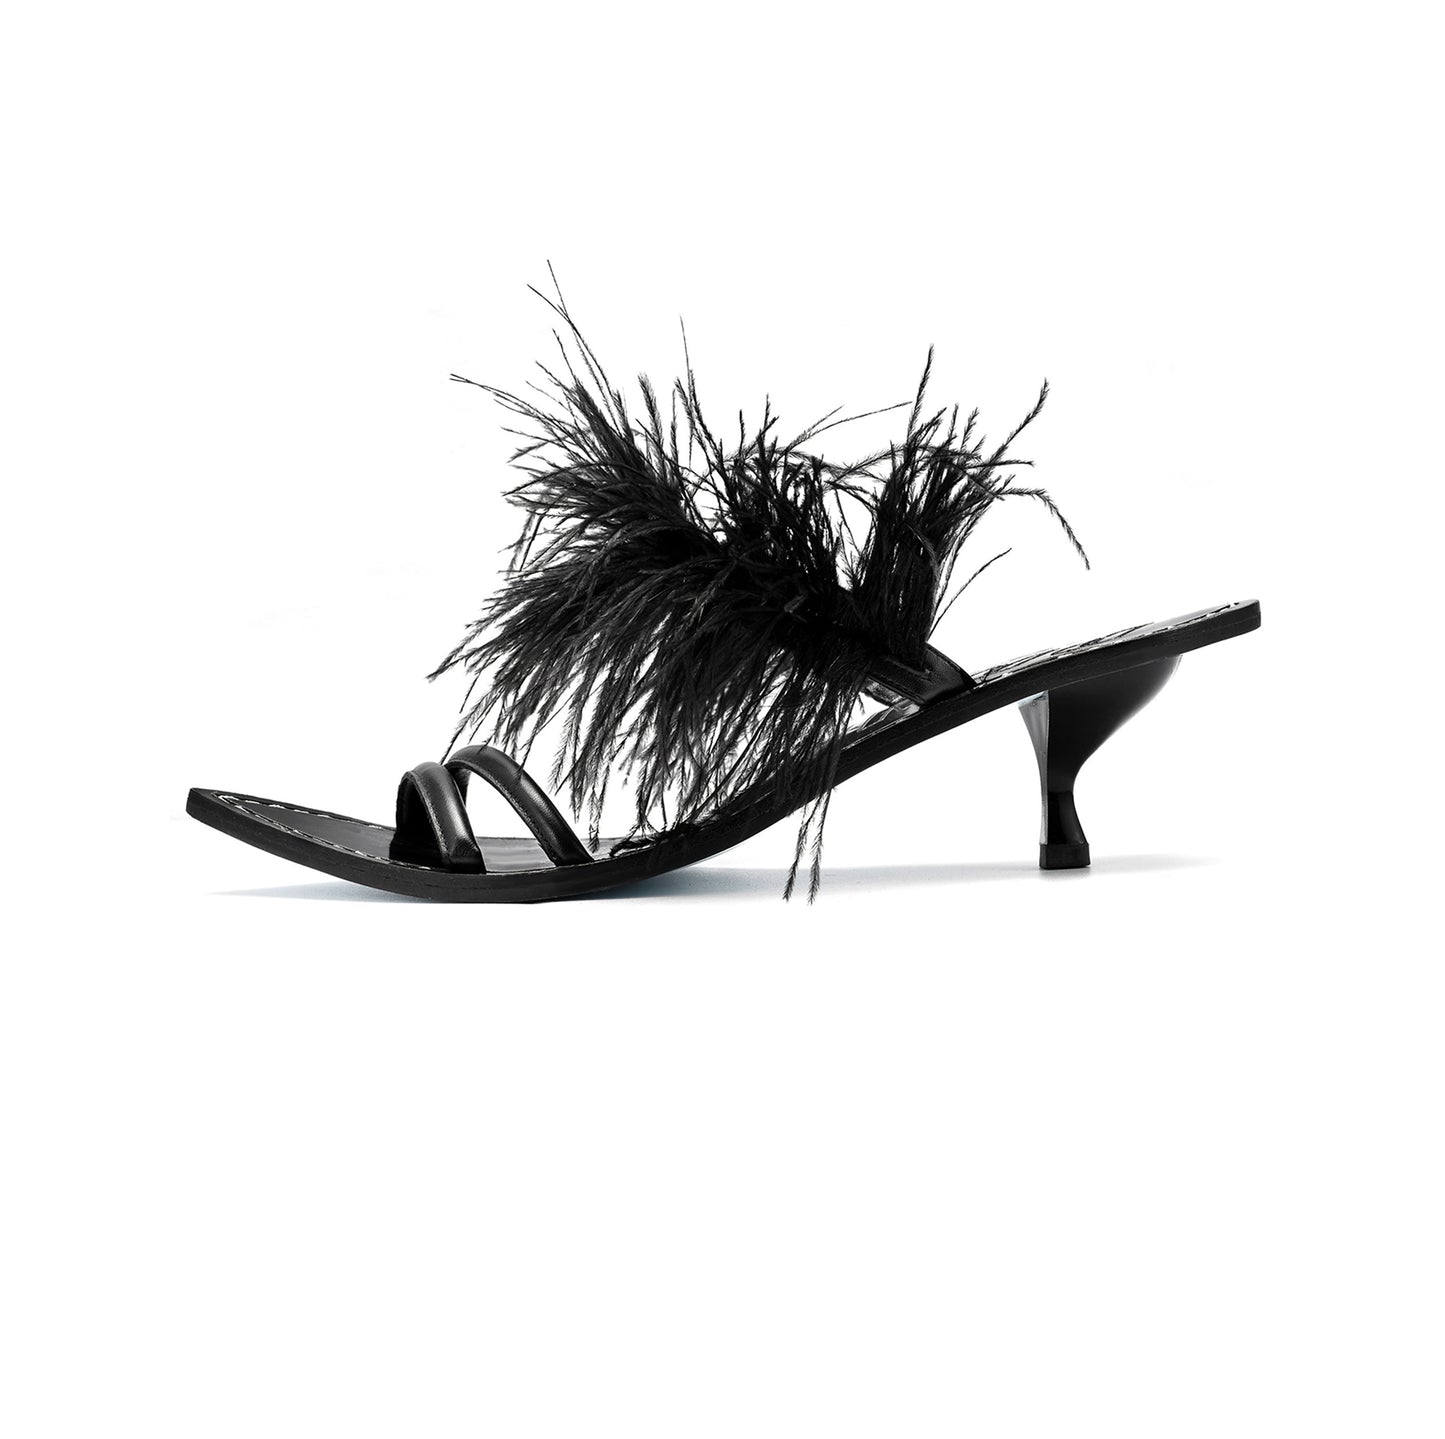 Hisoka Ostrich Feathers -trimmed Leather Mules in Black